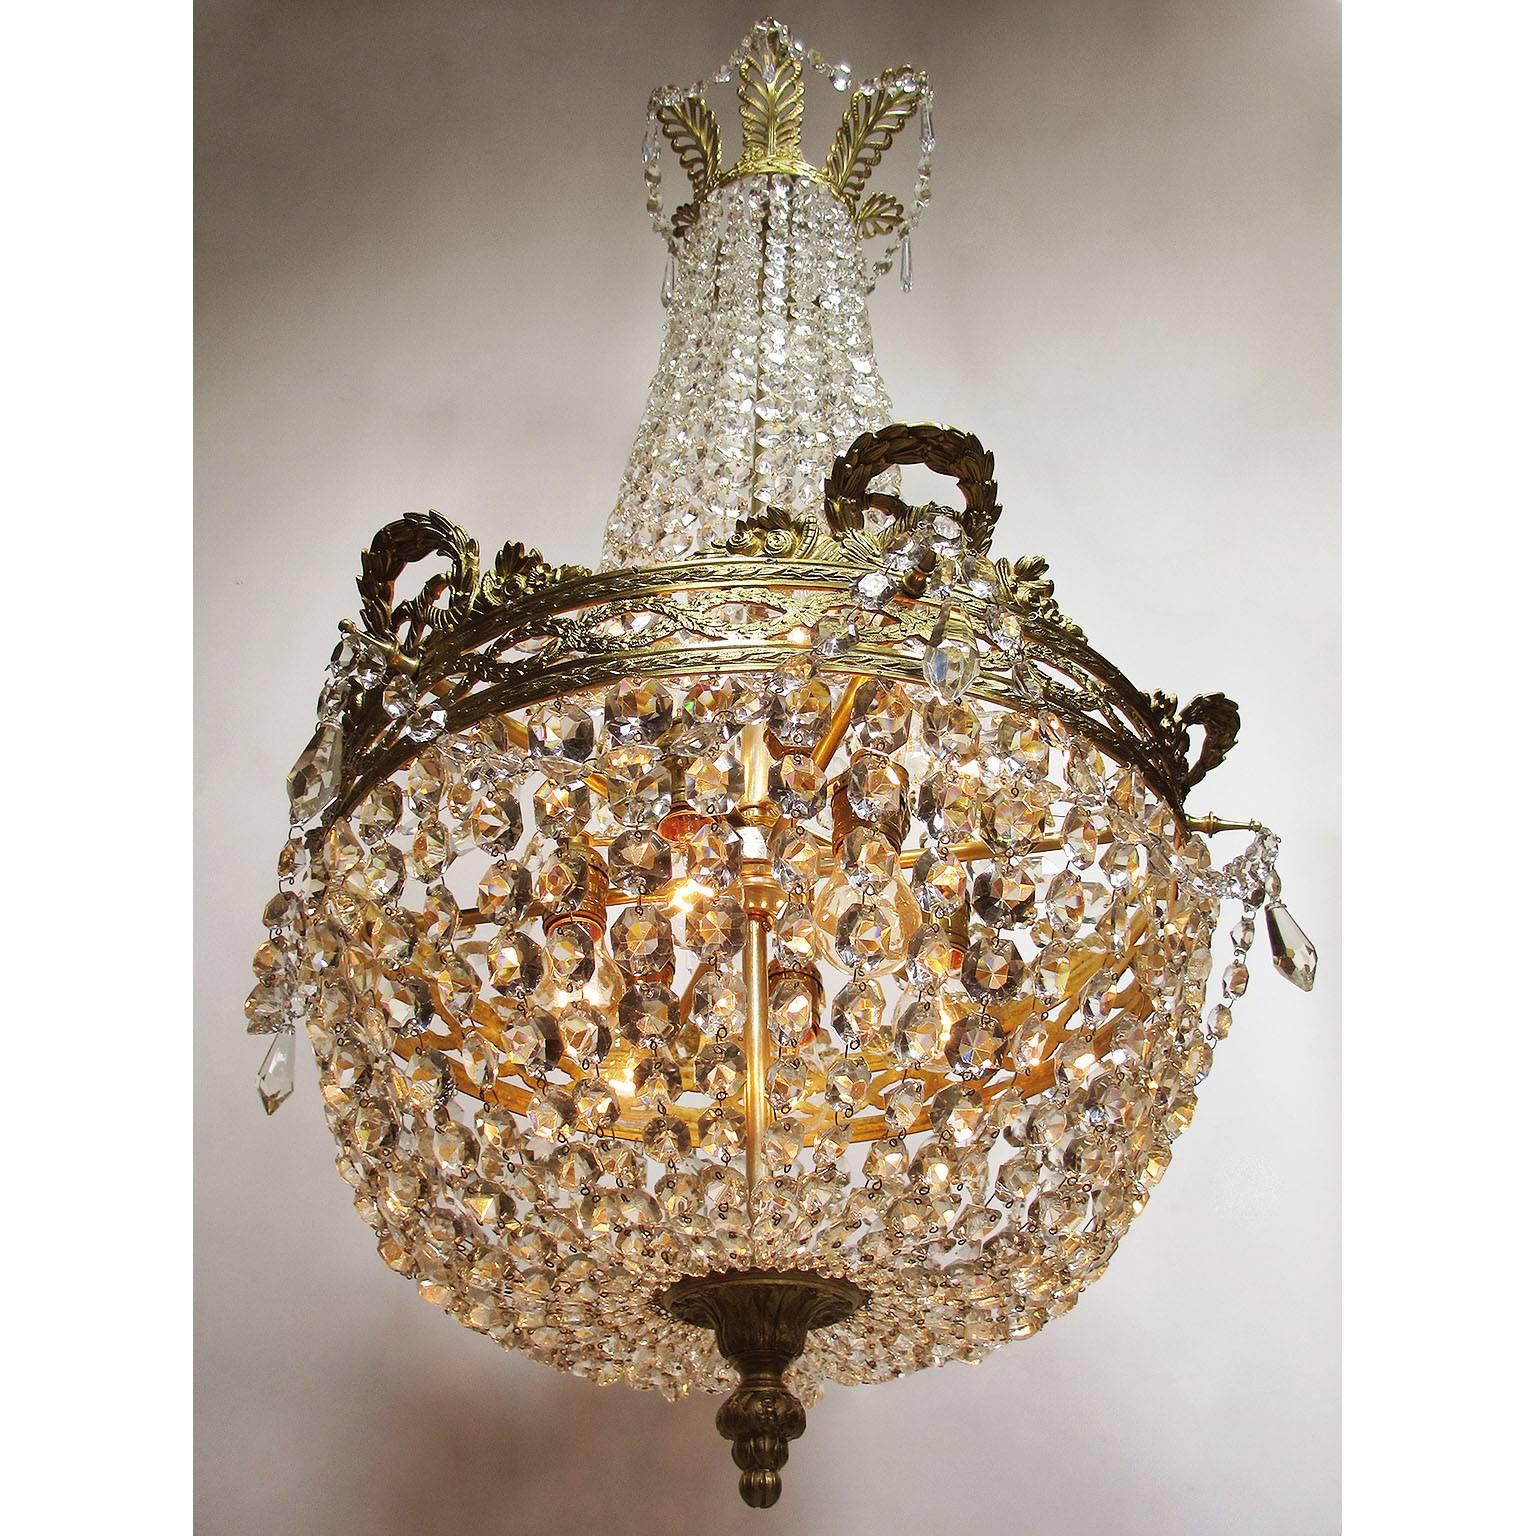 French 19th-20th Century Empire Style Gilt Metal and Cut-Glass Chandelier In Good Condition For Sale In Los Angeles, CA